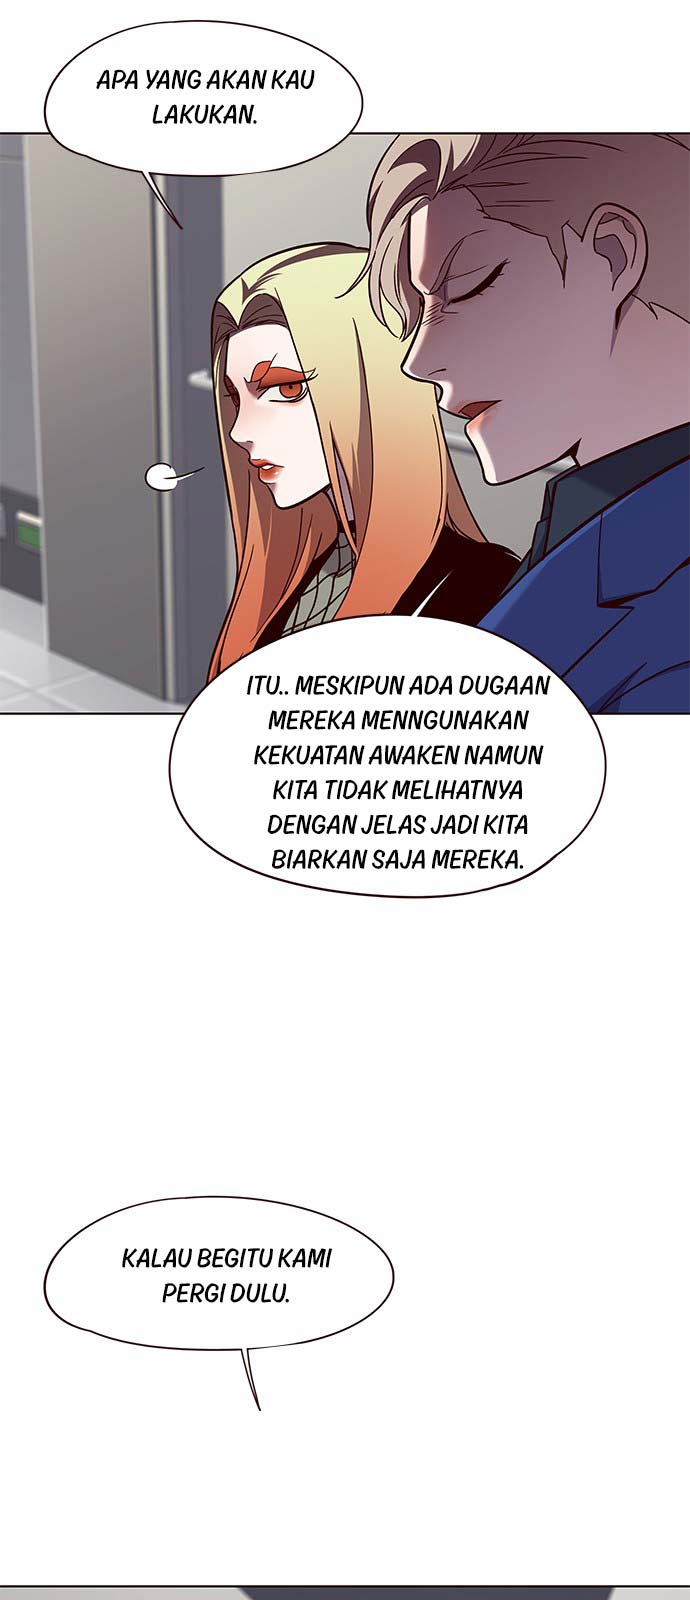 Eleceed Chapter 78